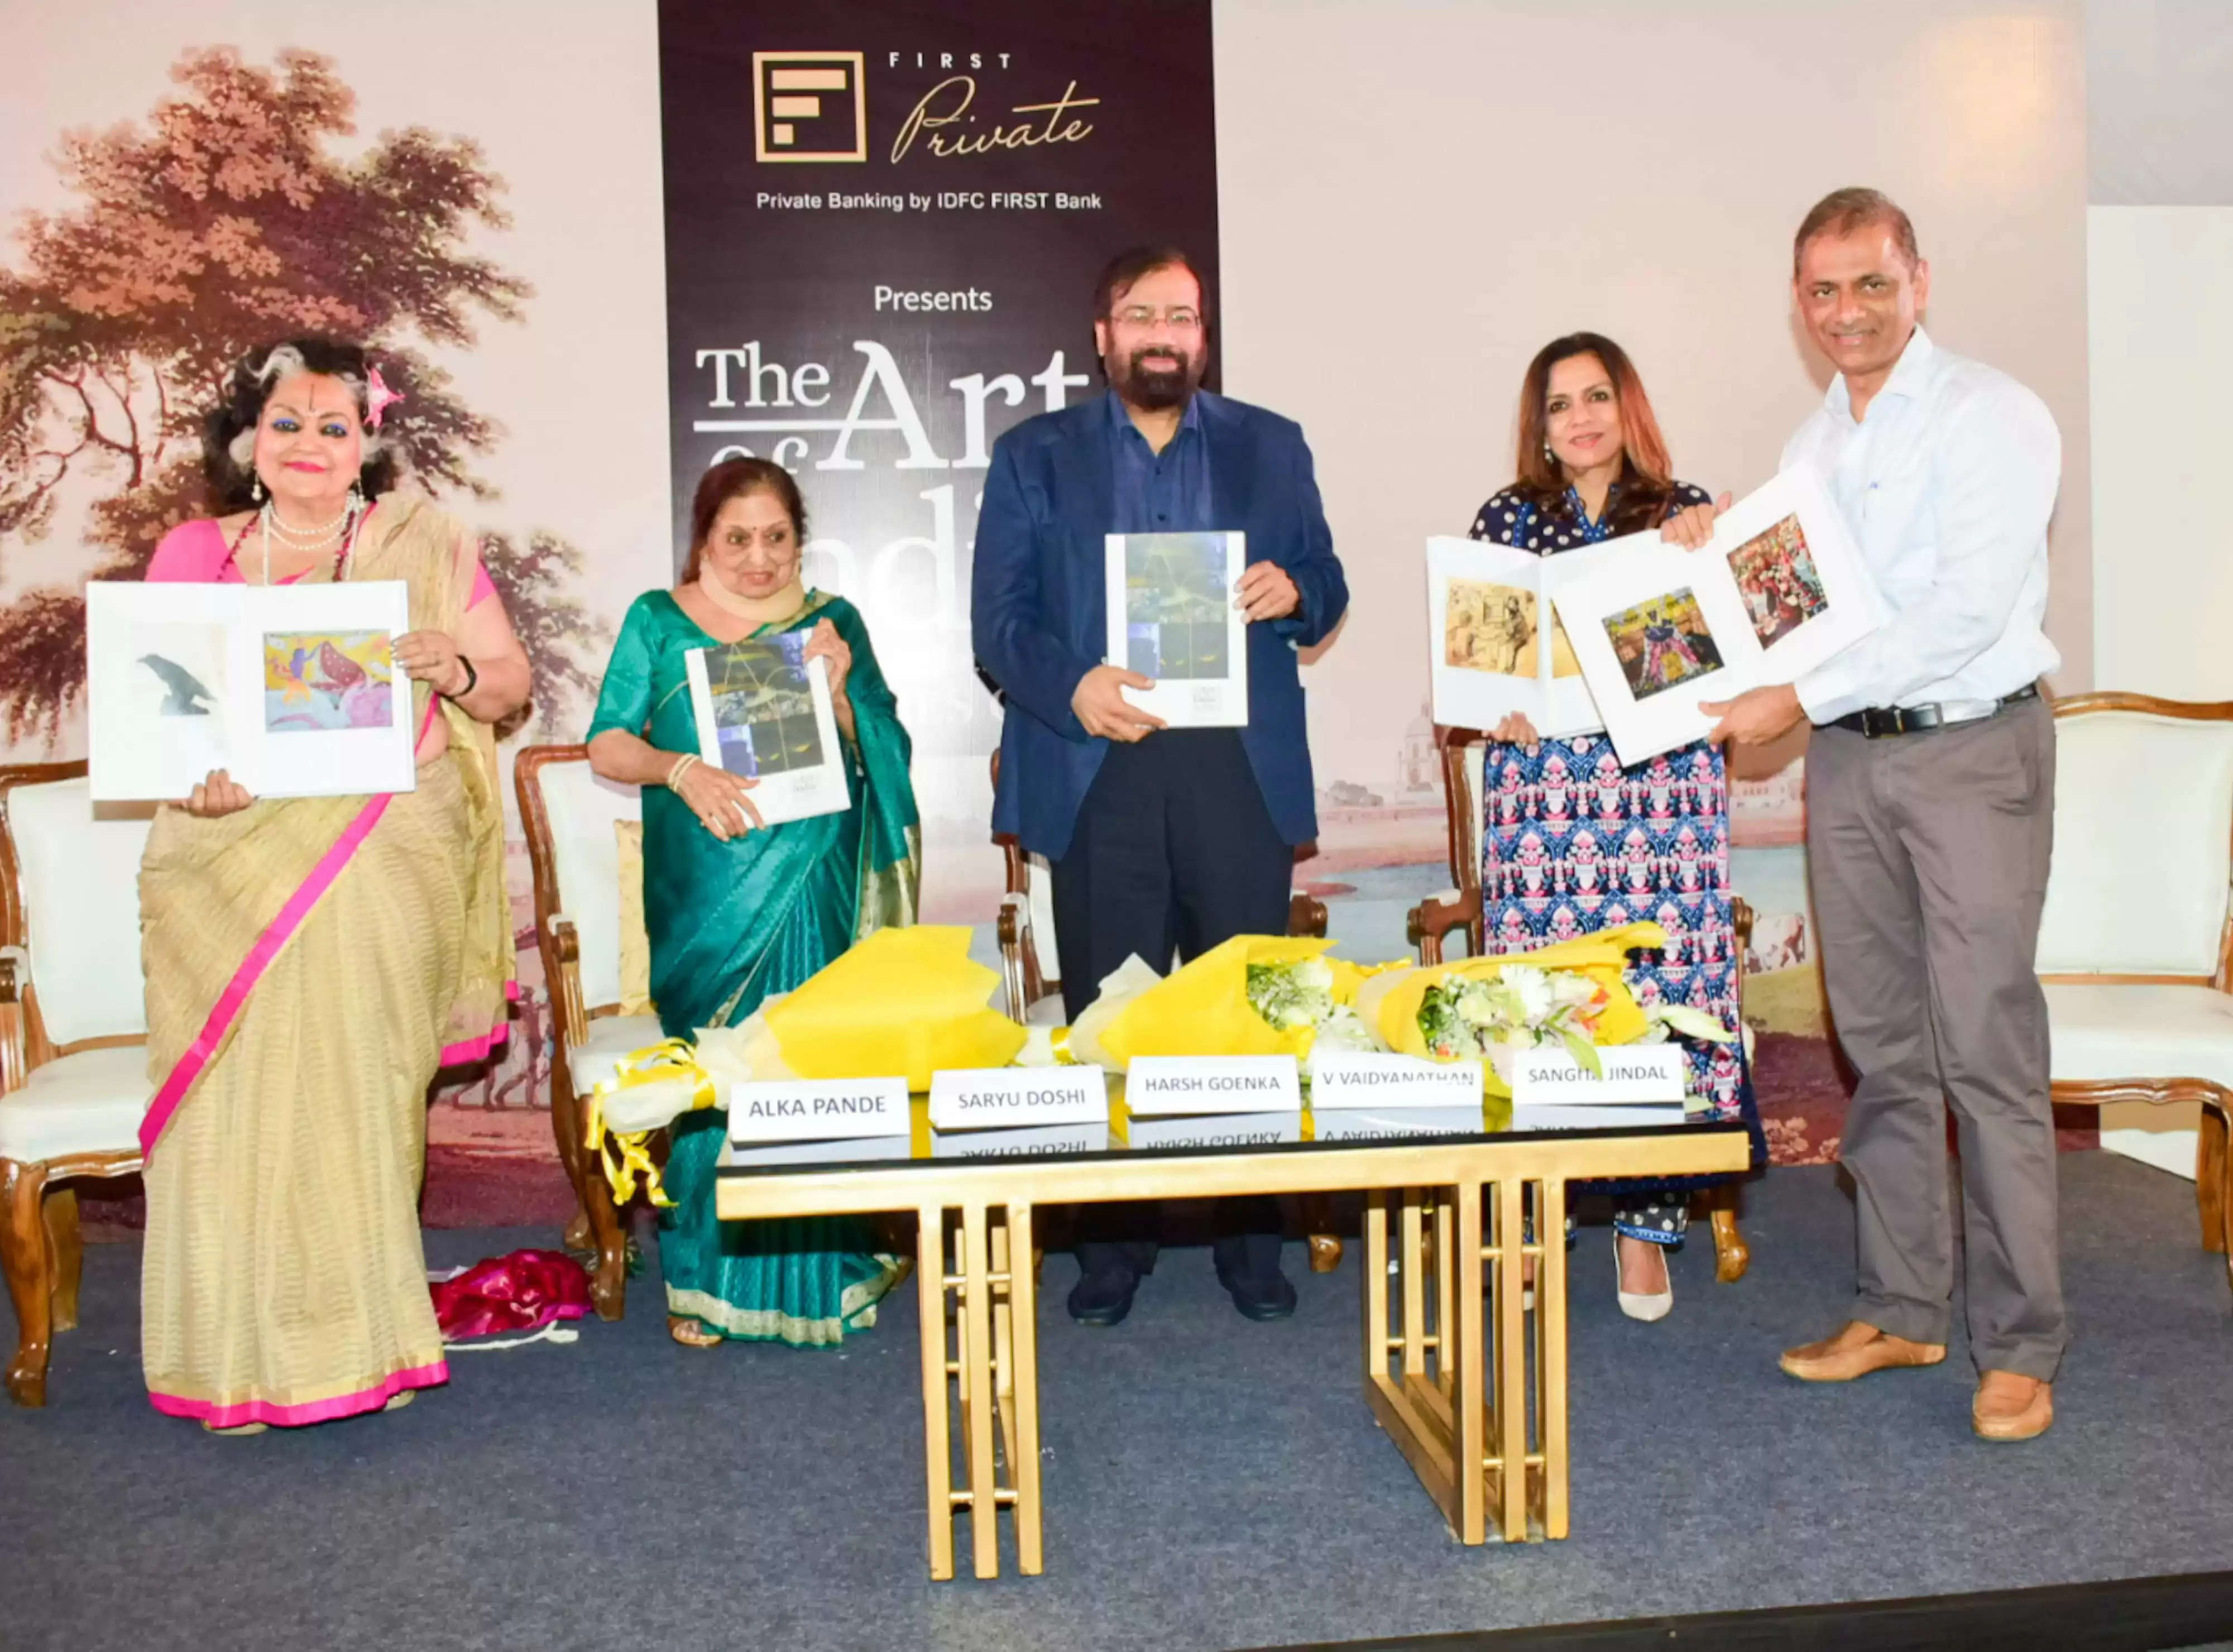 "The Art of India's" Third Edition: Showcasing Tradition, Transition, Modernity
Additional works by Masters and artists added to the Mumbai edition